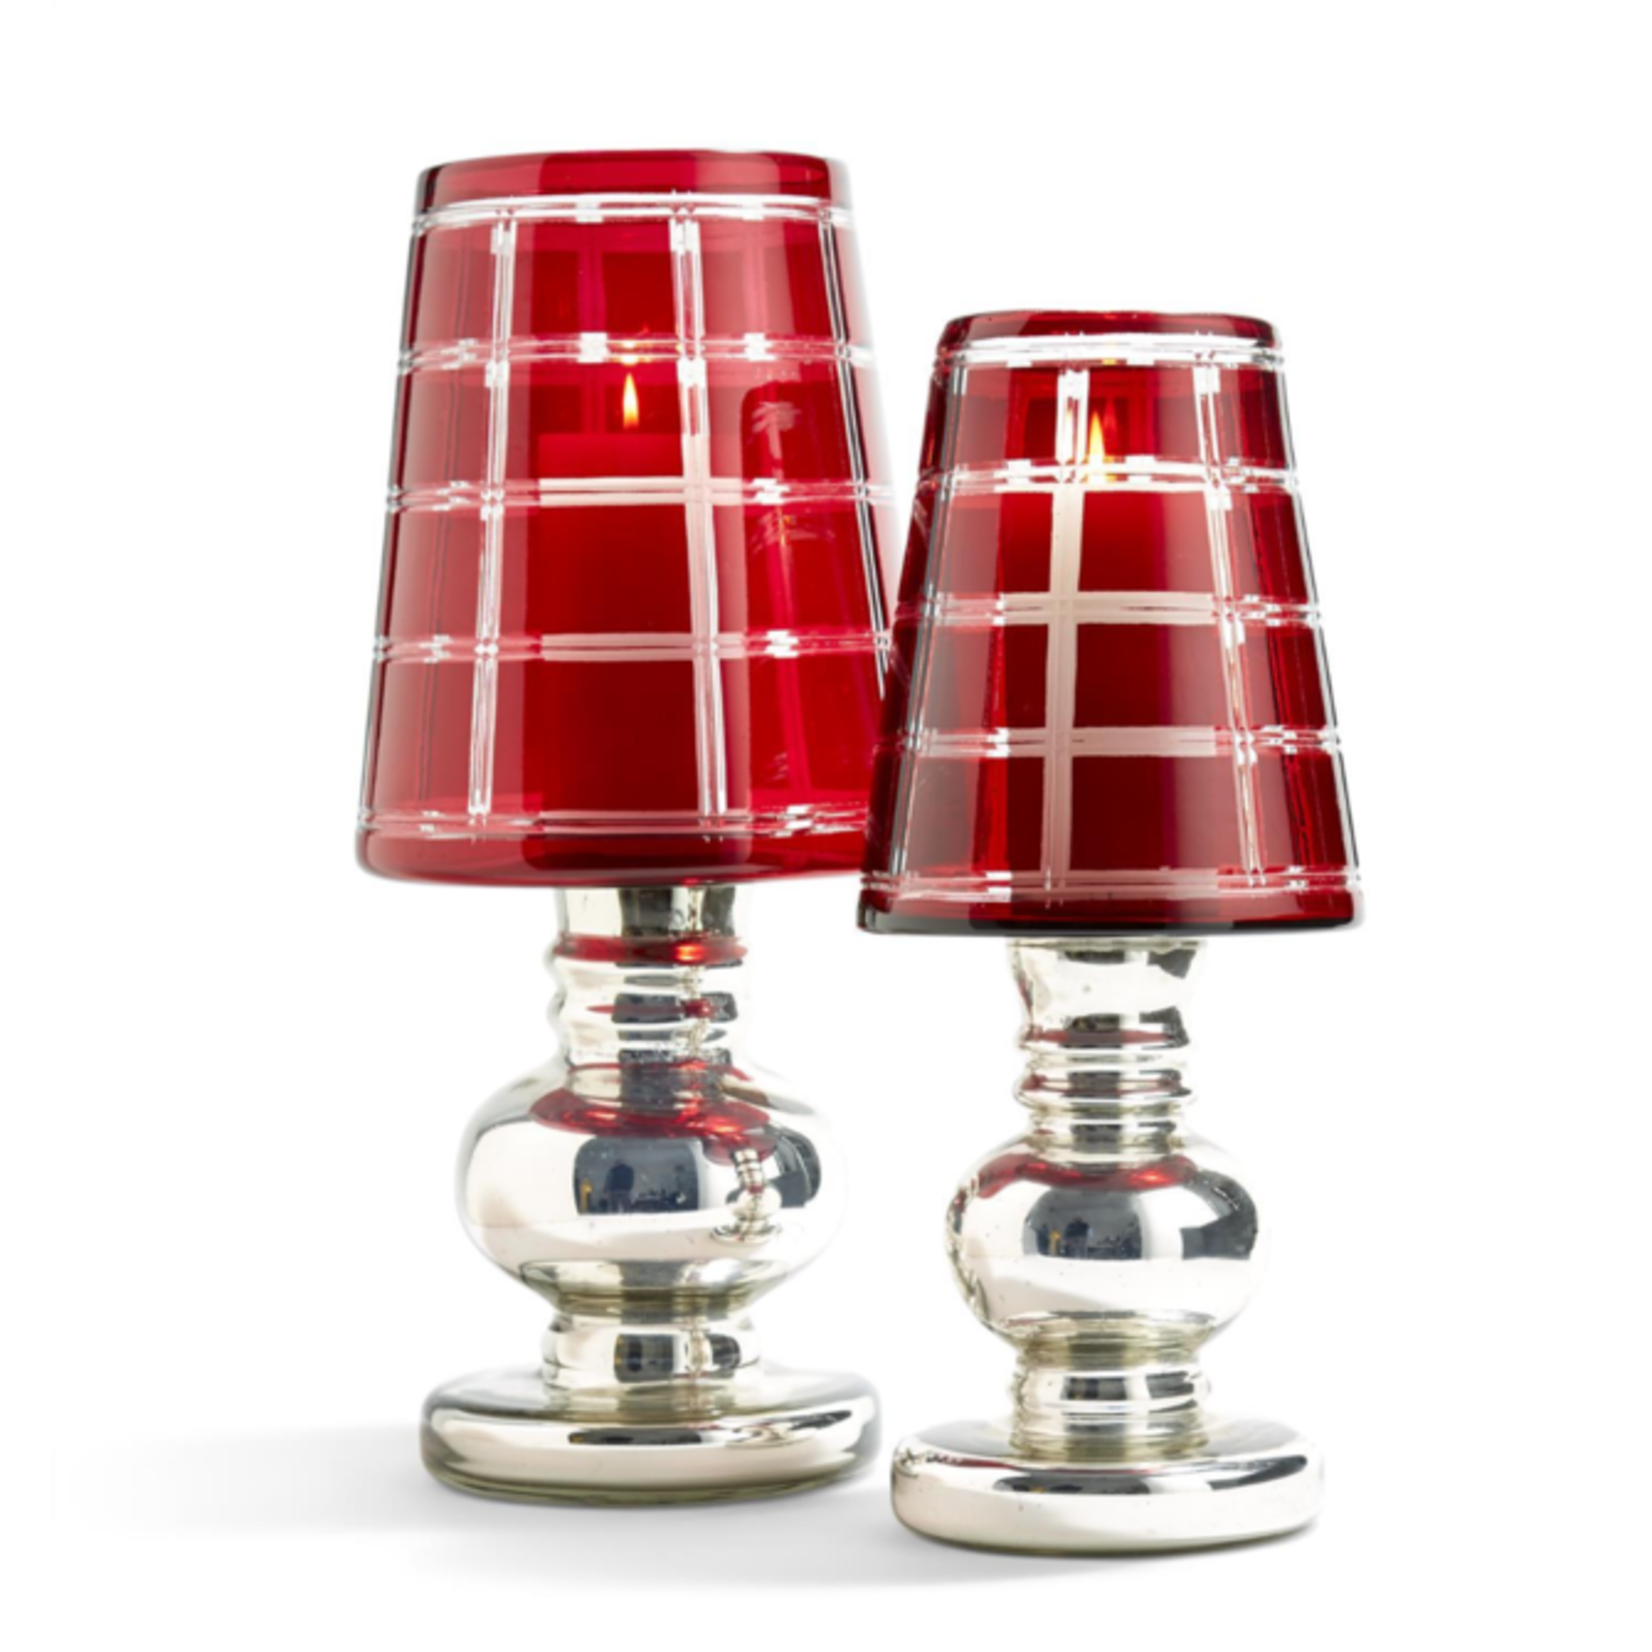 Tozai Grandeur Red Hurricanes with Mercury Glass Finish Base Small